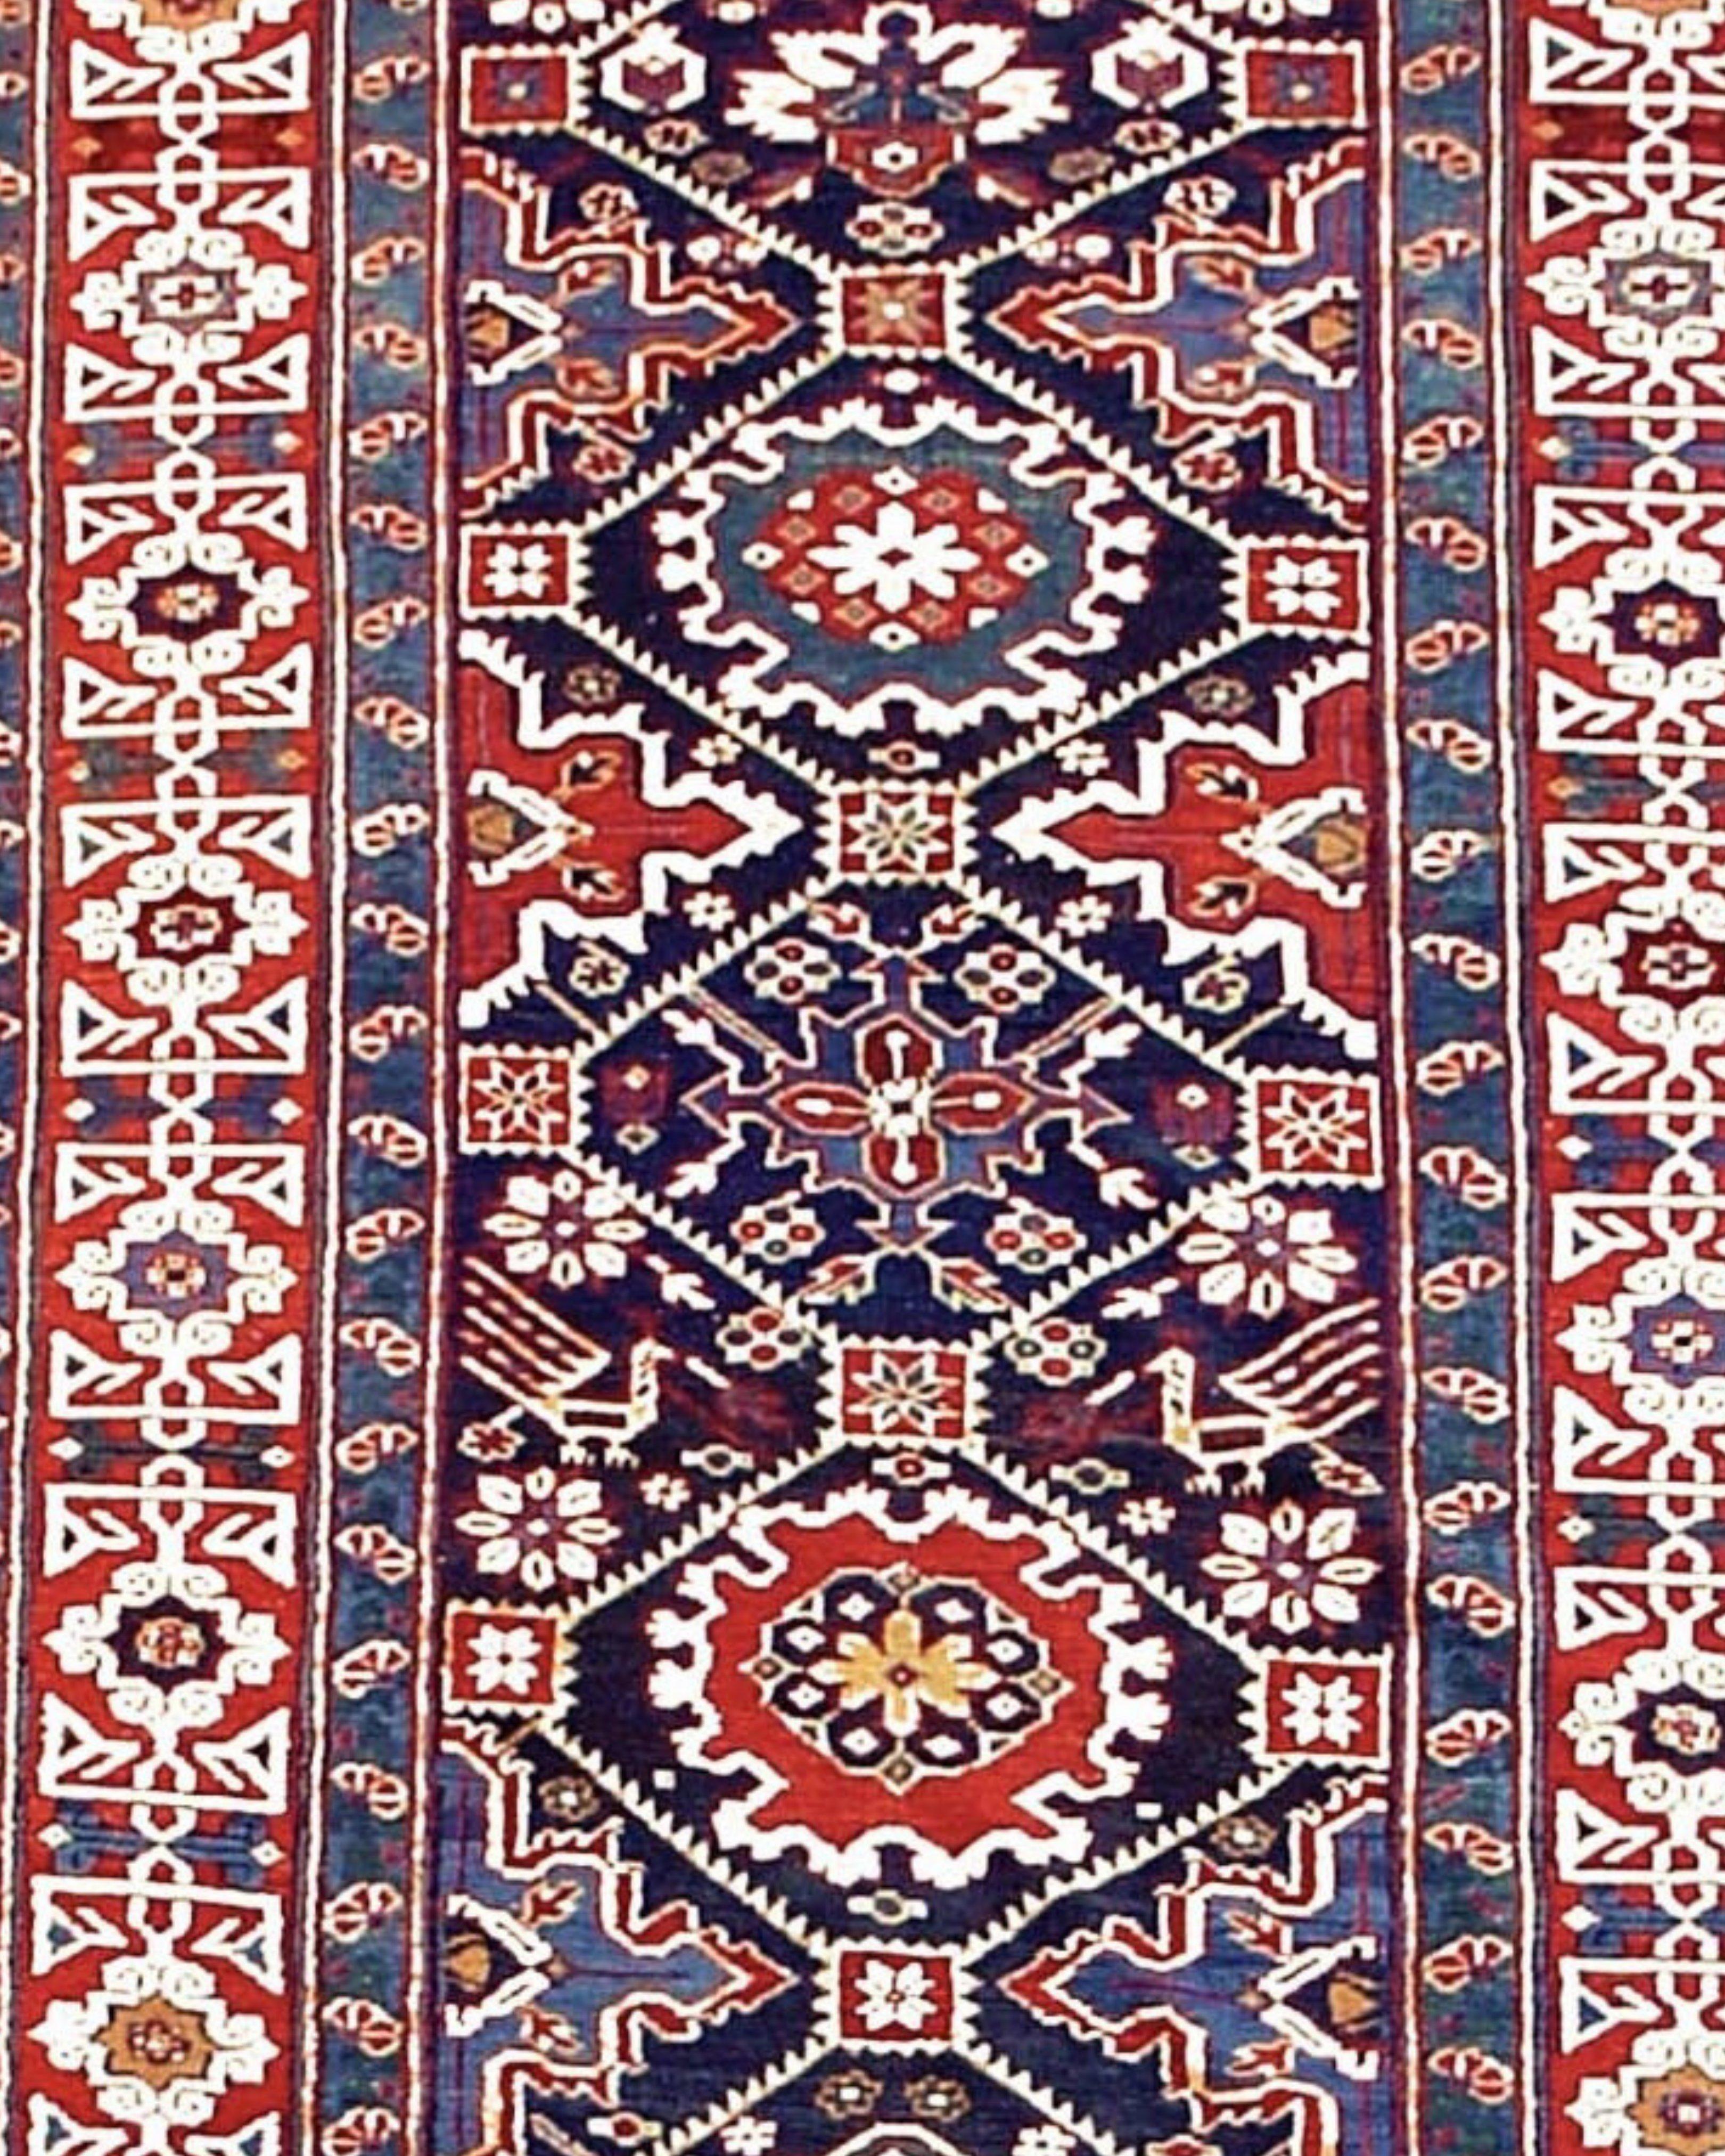 Antique Caucasian Shirvan Runner Rug, Late 19th Century

Minor repiling.

Additional information:
Dimensions: 3'6